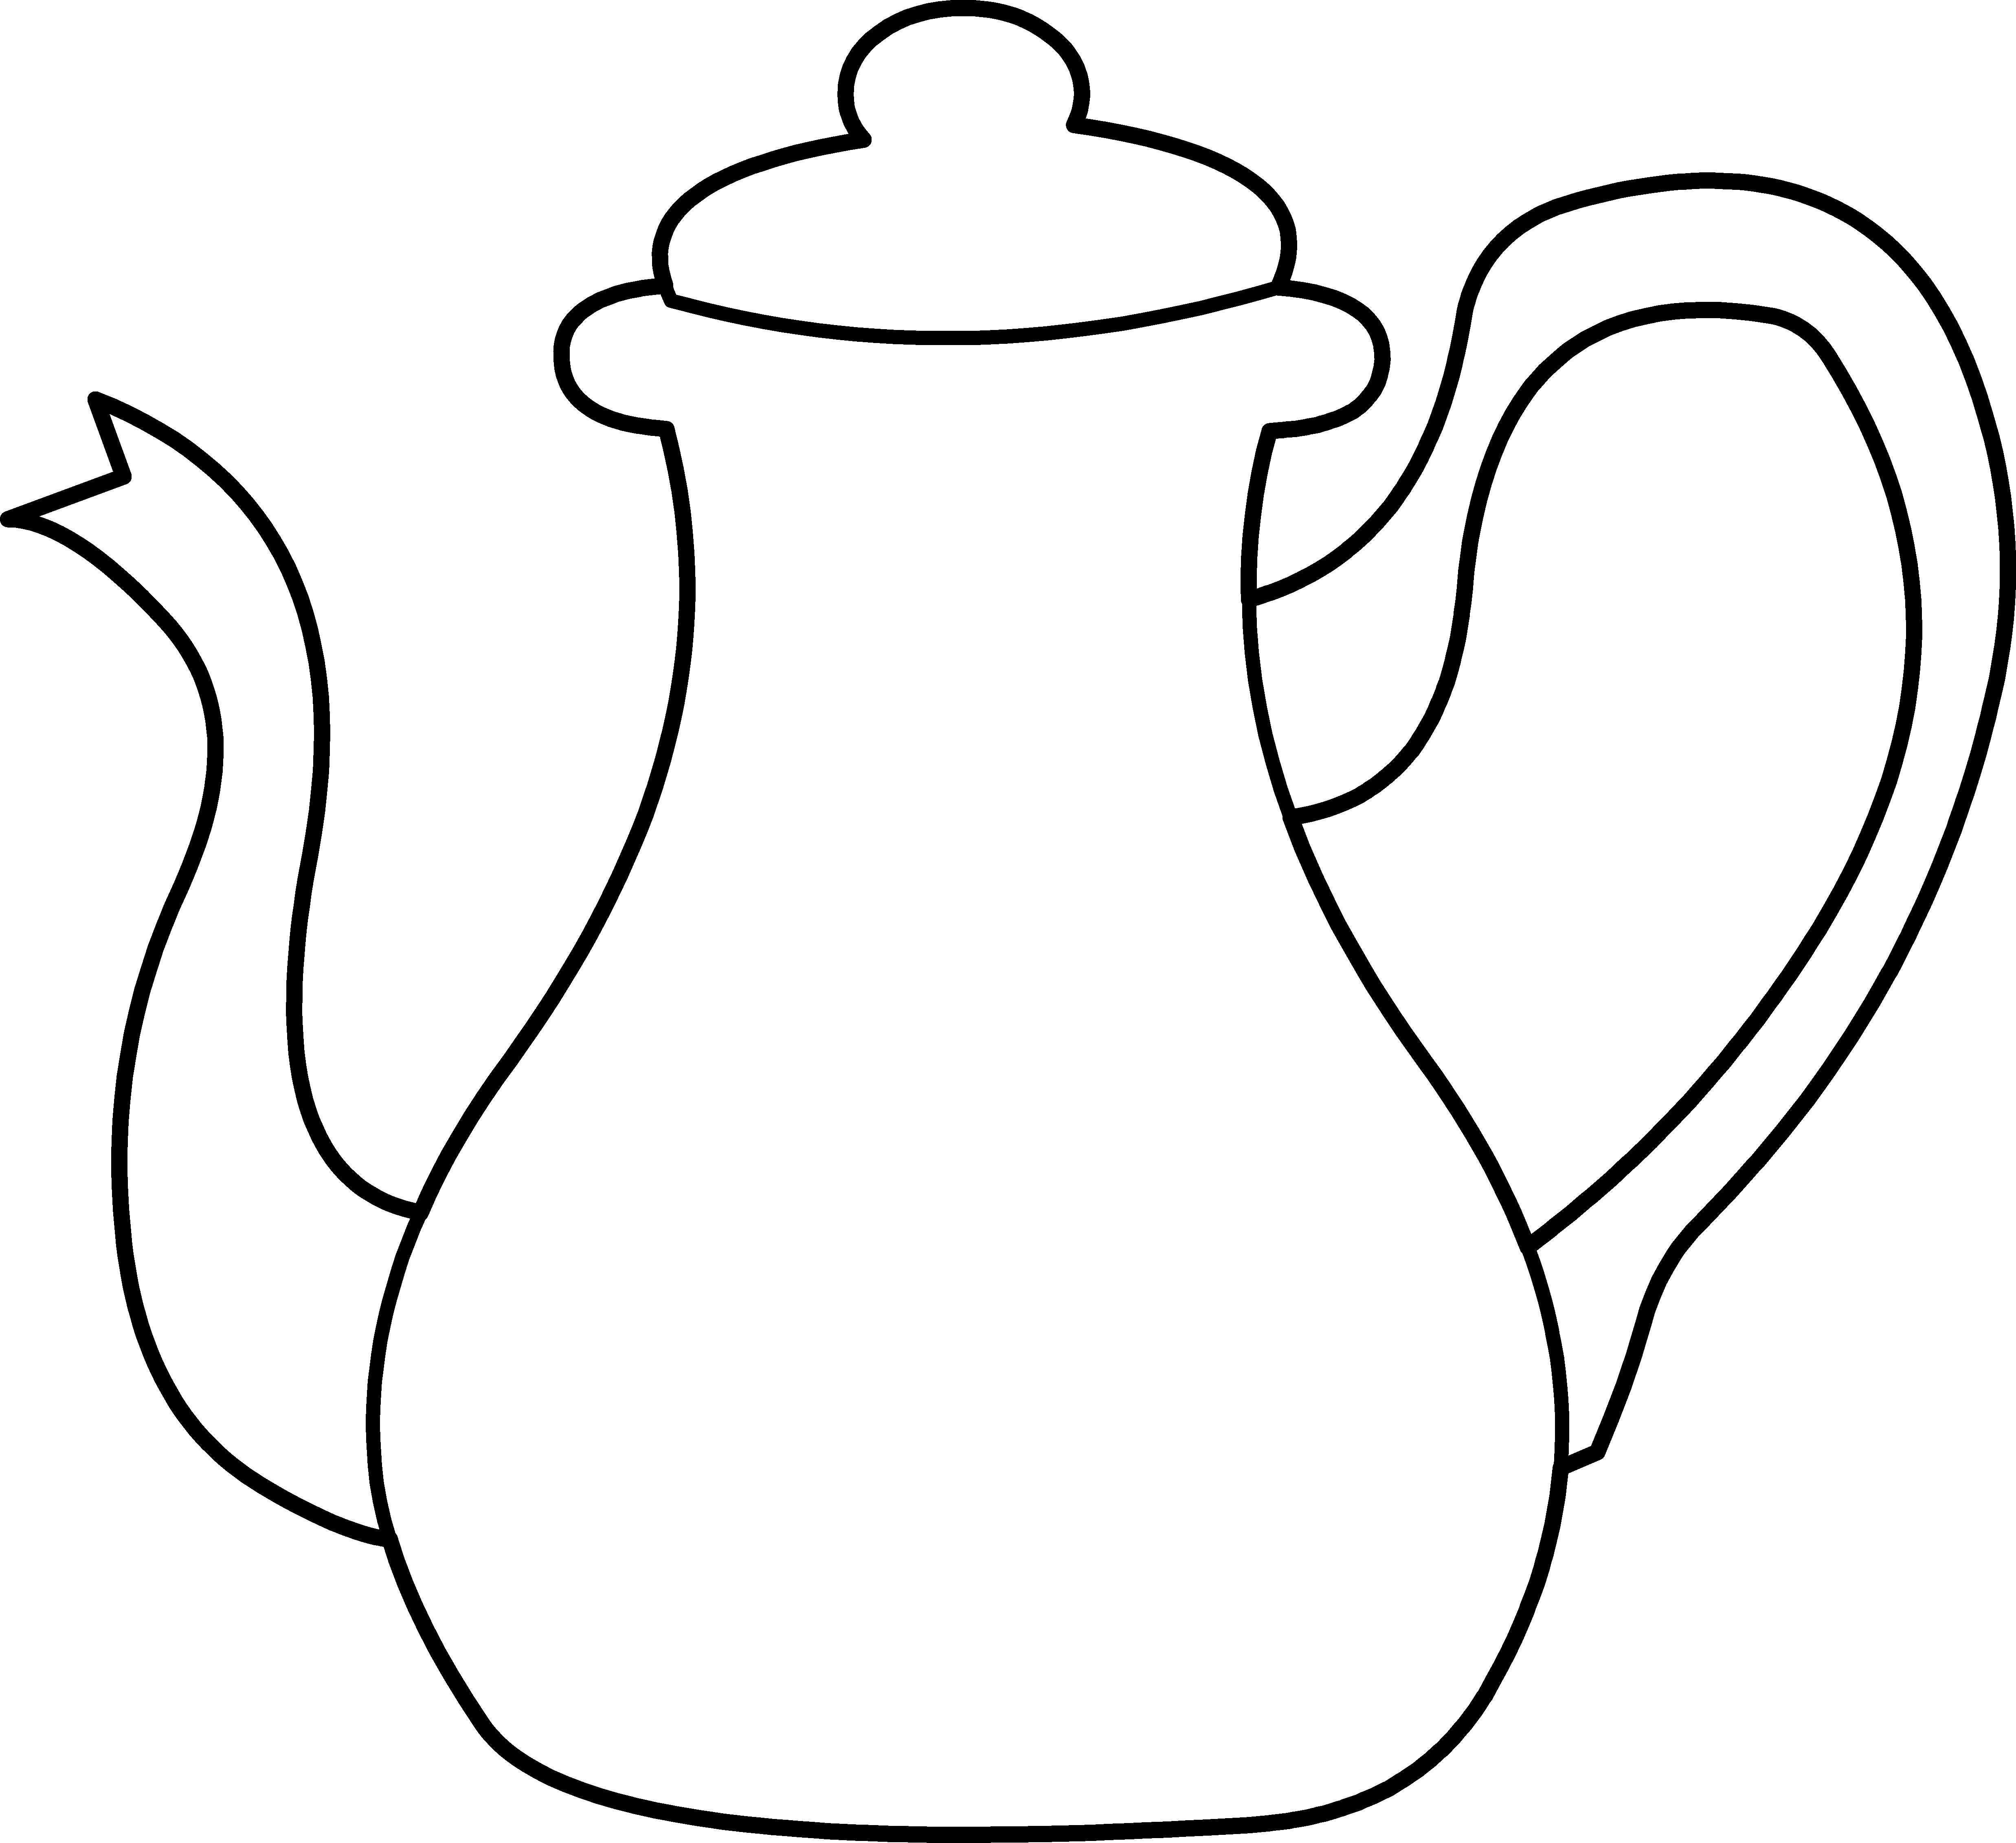 Teacup Clipart Black And White Silhouette Of Tea